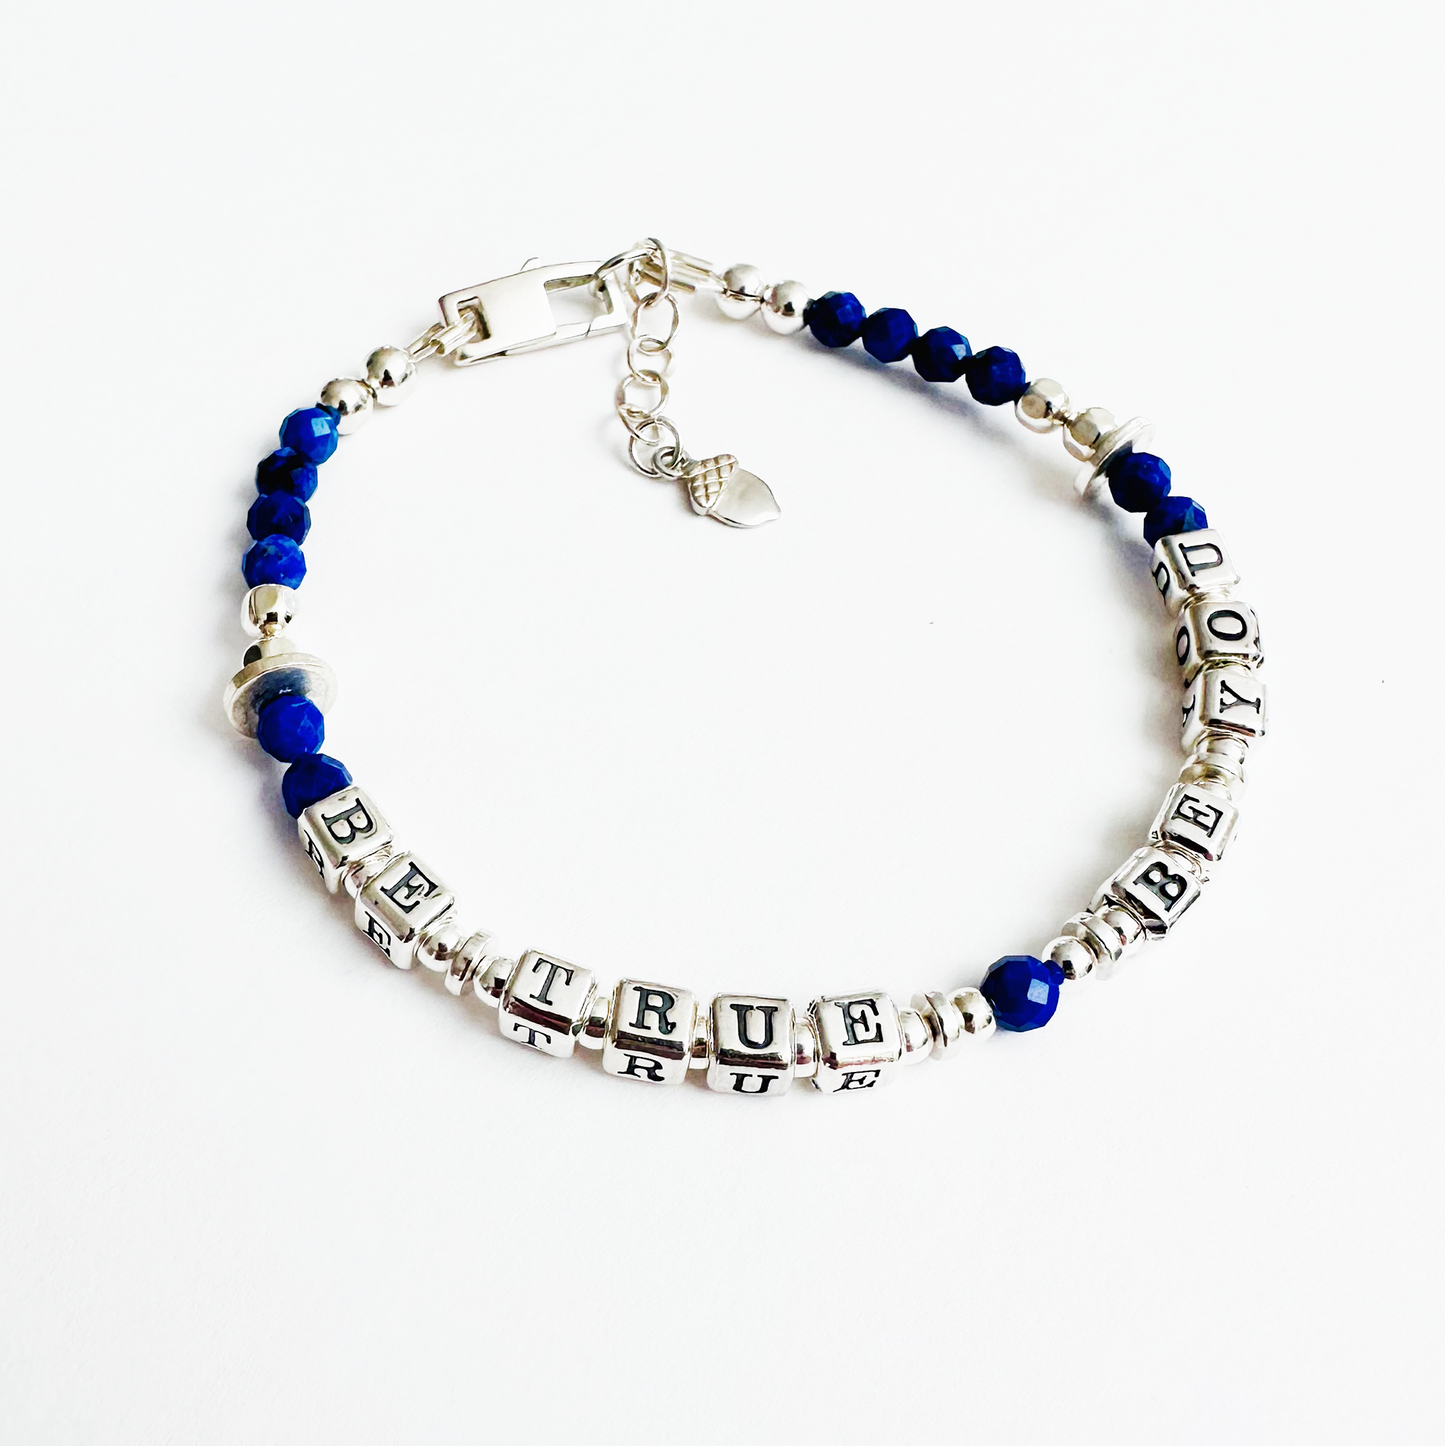 Be True, Be You Sterling Silver Bracelet with blue lapis lazuli gemstones and acorn charm